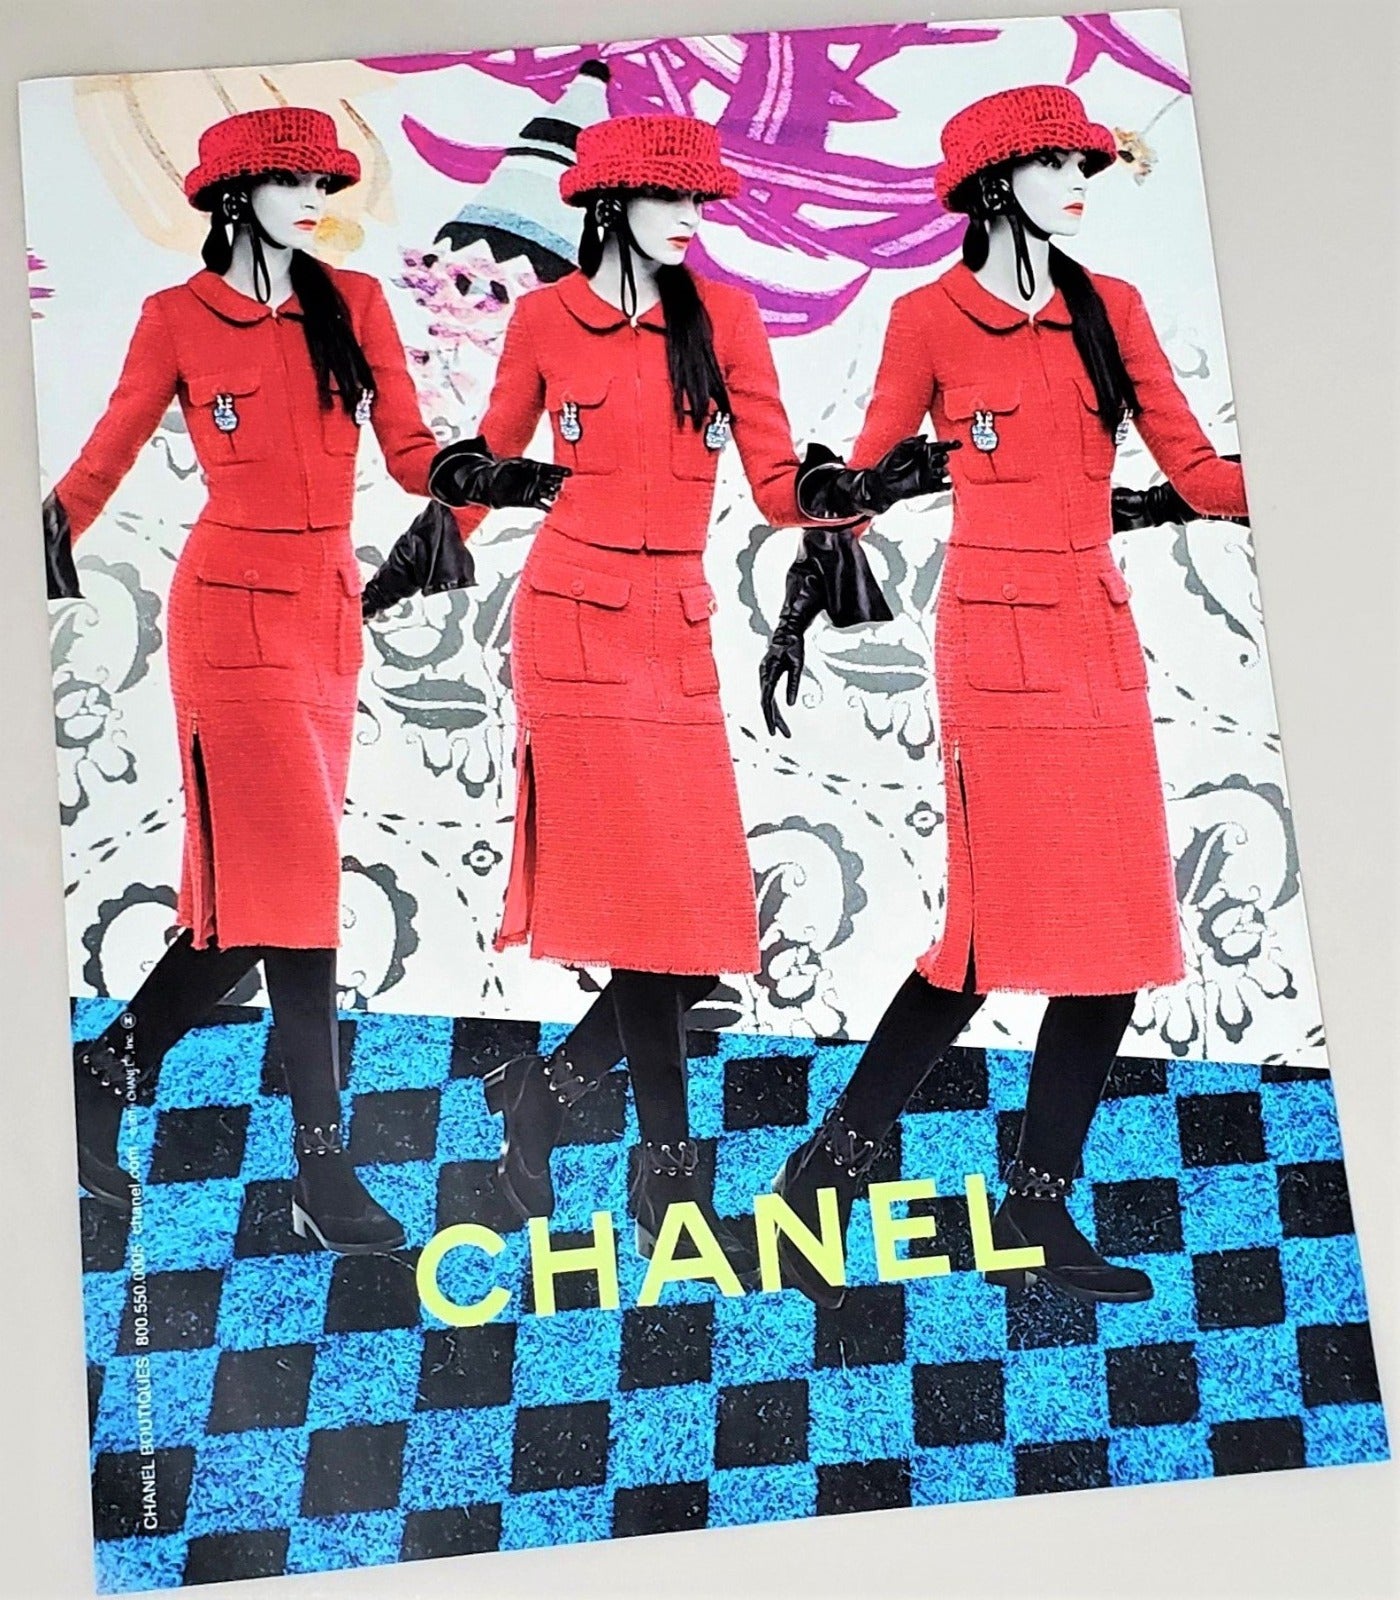 Chanel campaign photograph advertisement page featured in September 2016 fashion issue of Vogue magazine available in area51gallery